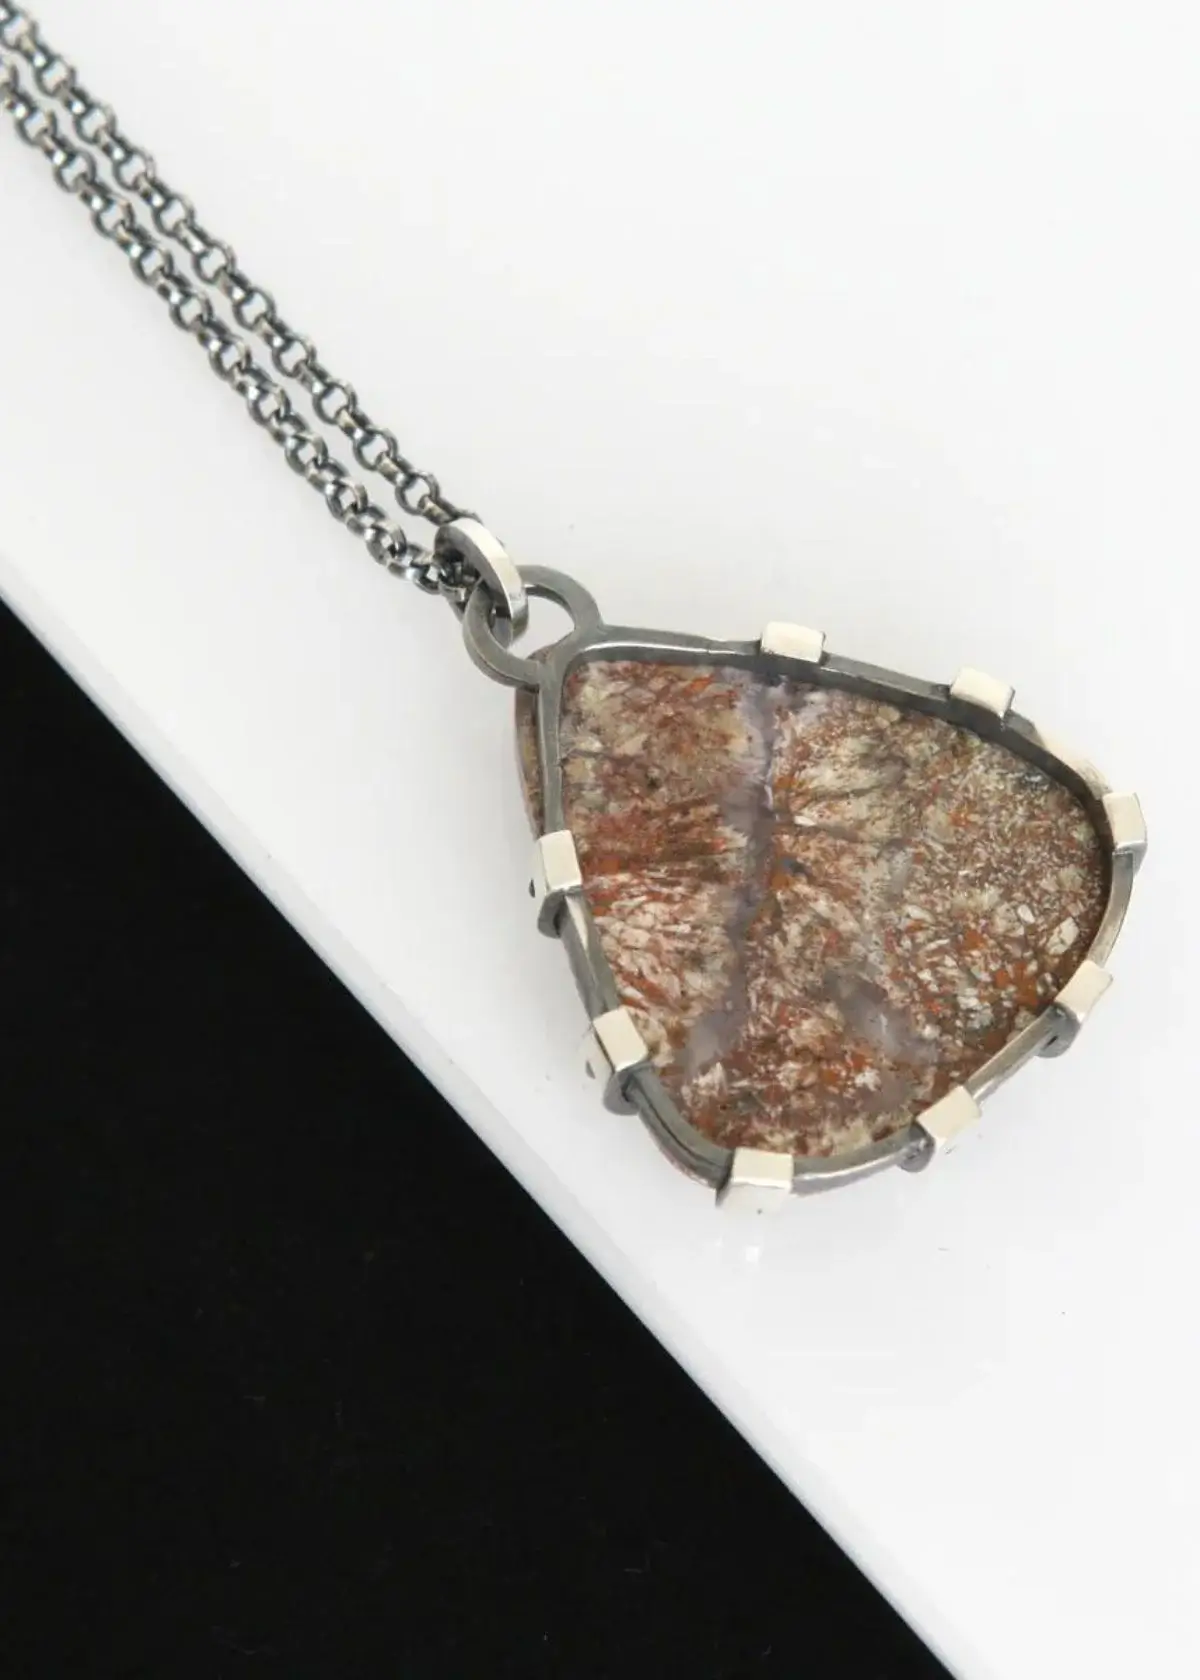 How to Choose the Right Coprolite Jewelry?